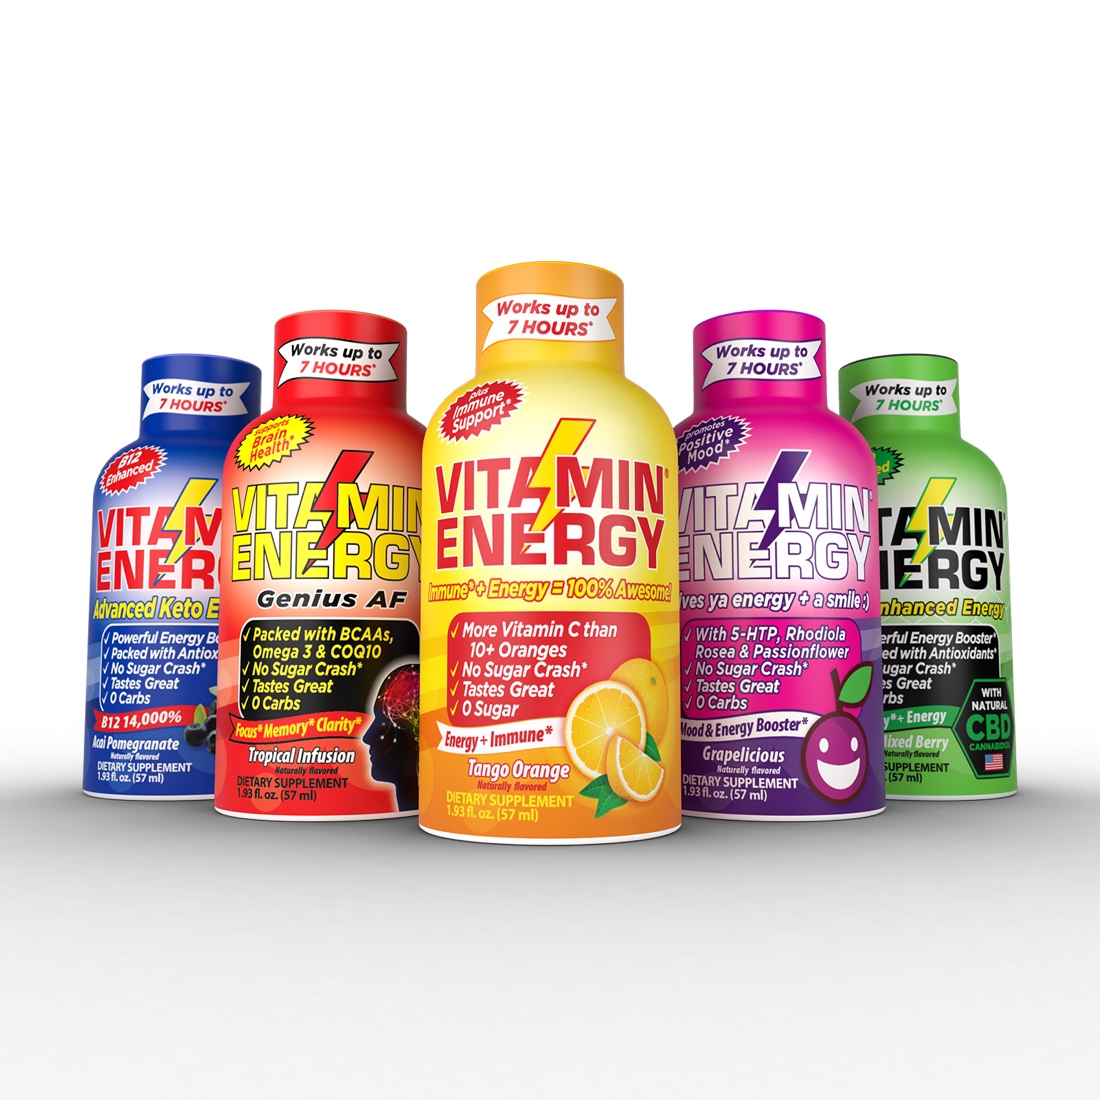 Vitamin Energy, LLC, Monday, August 26, 2019, Press release picture